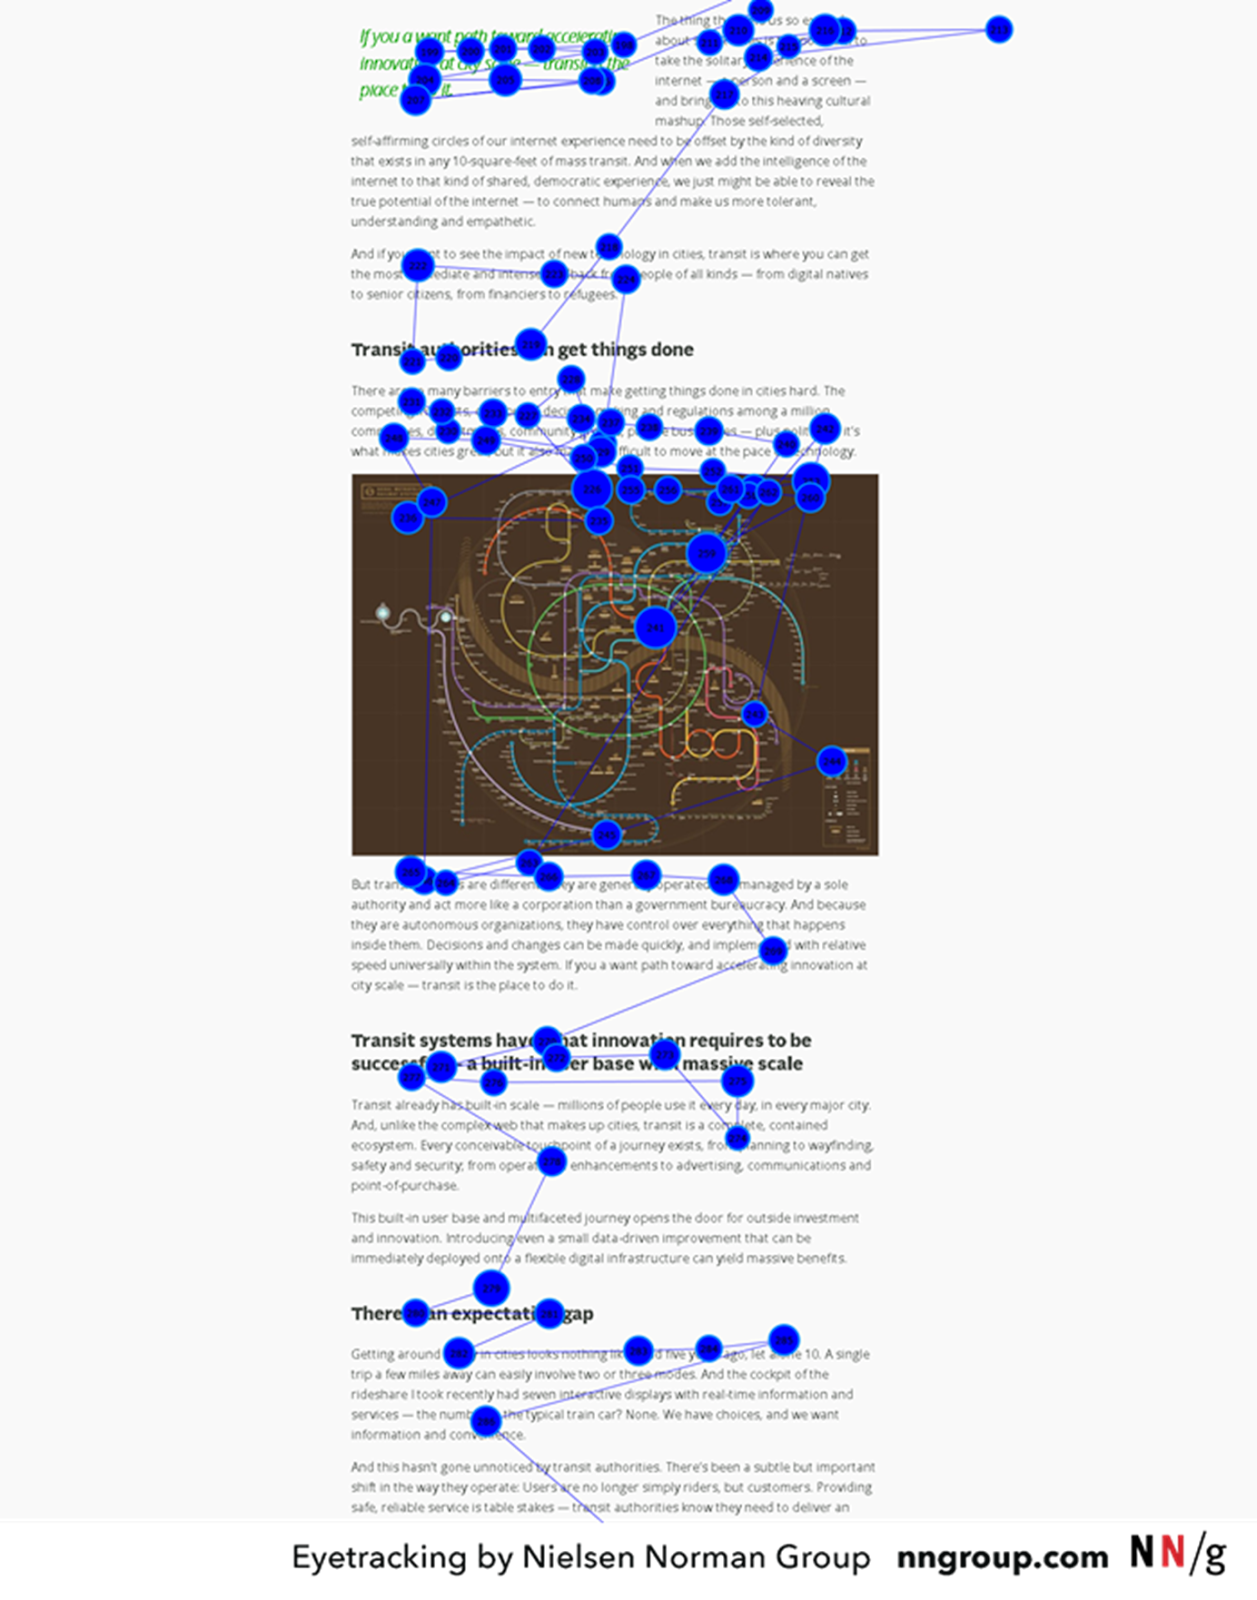 The results of an eyetracking study show user focus scattered throughout a page.